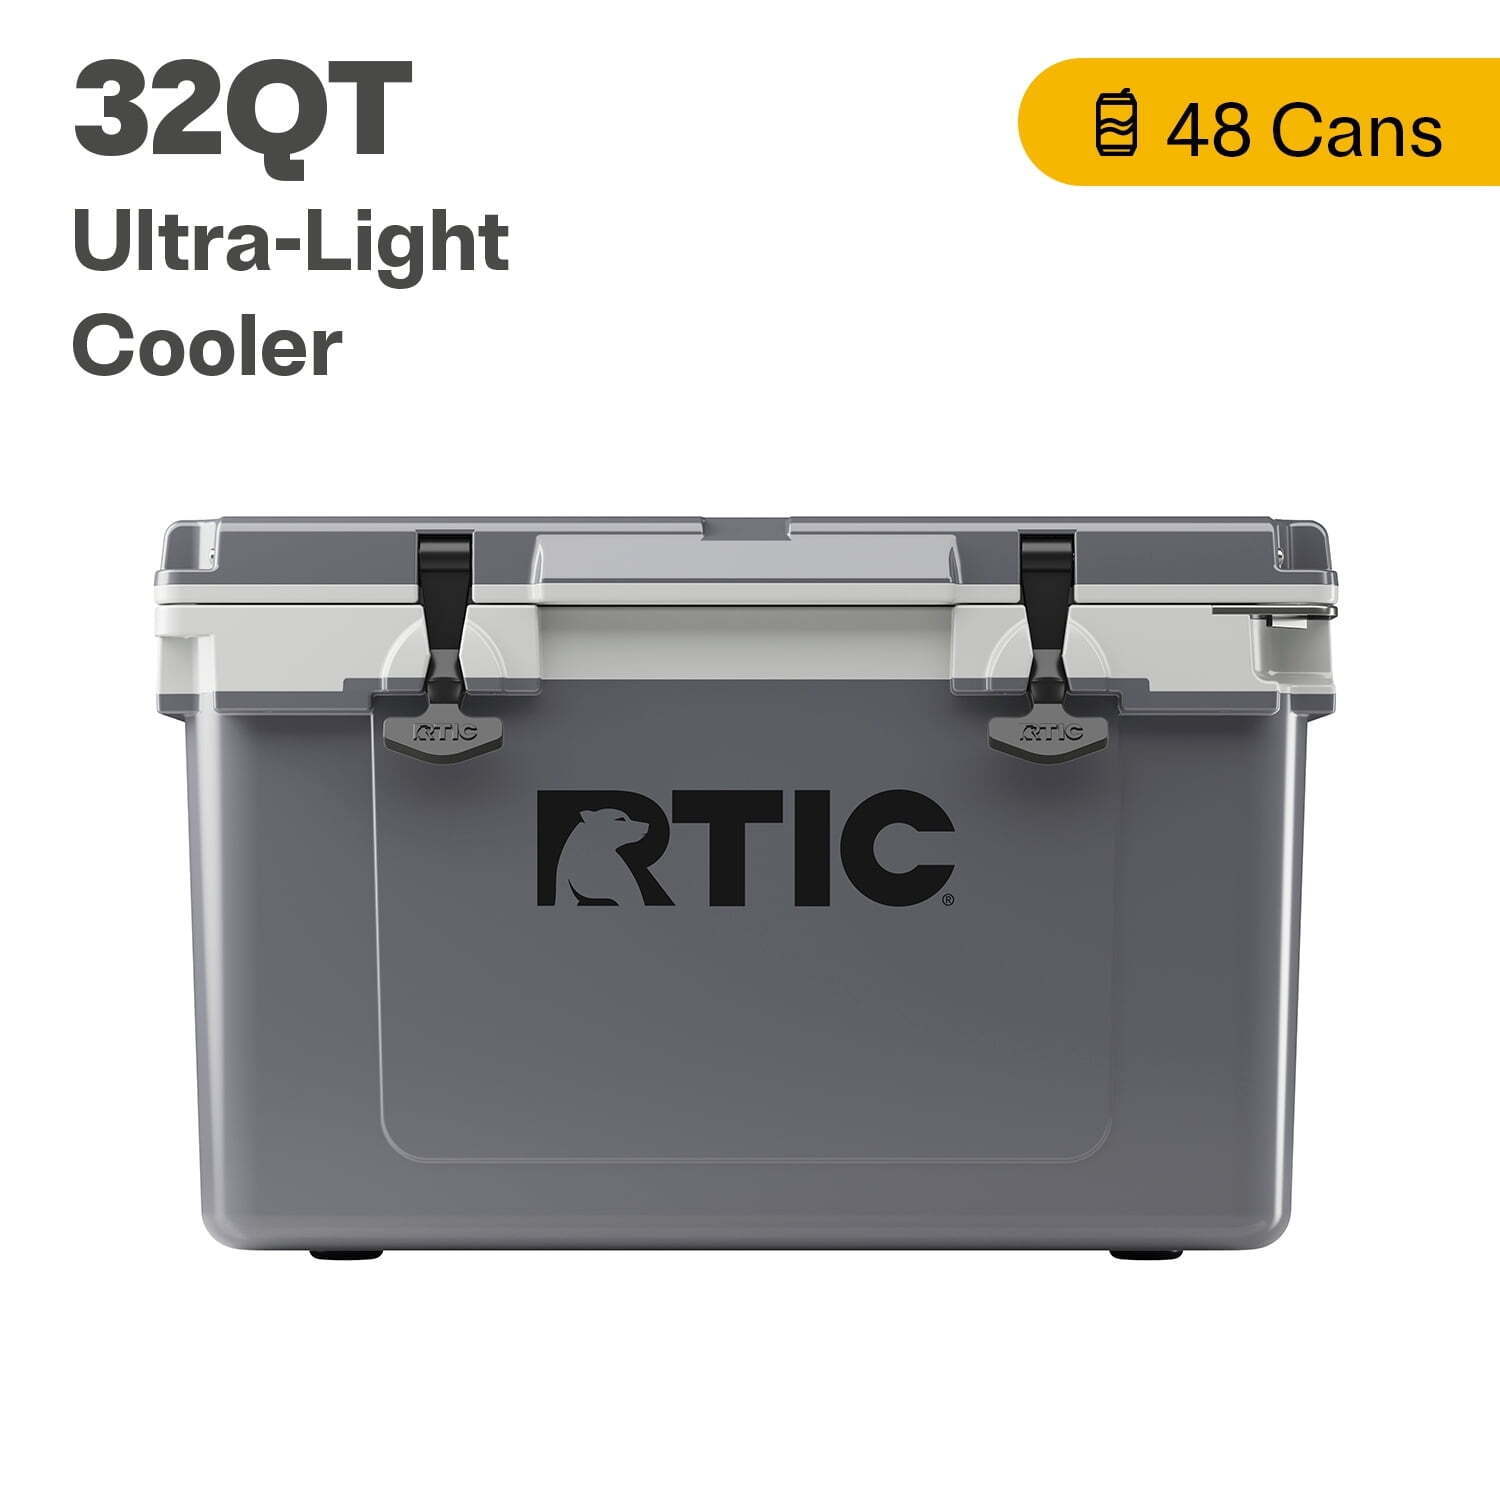 32 Ultra-Light Hard-Sided Ice Chest Cooler, Dark Grey And Cool Grey Fits 48 Cans